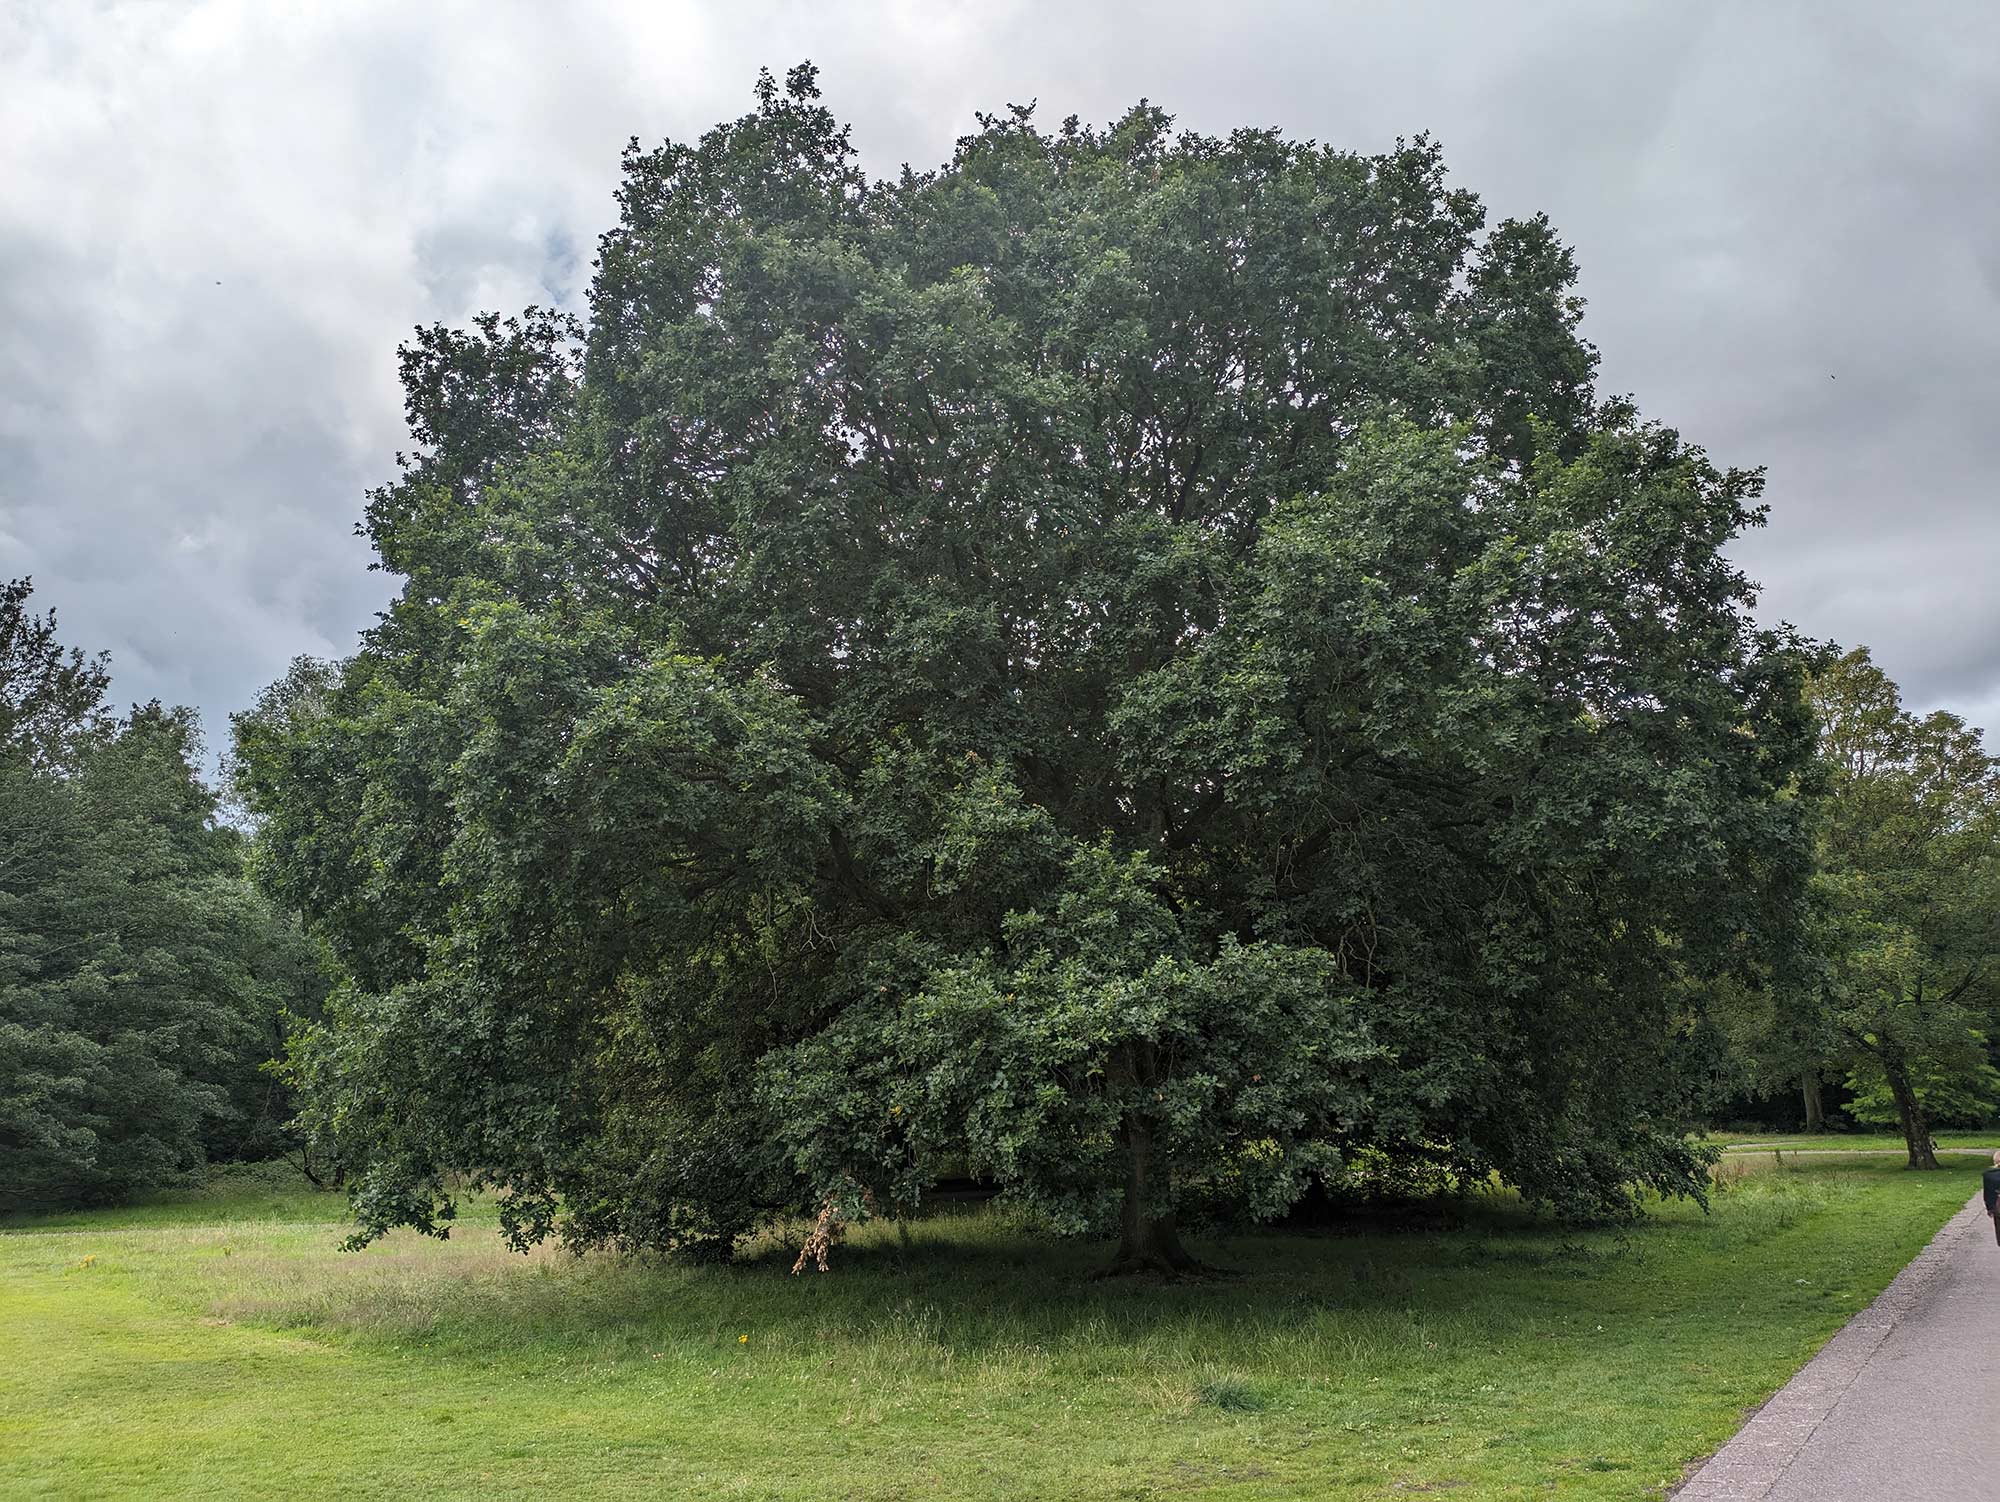 A large English oak in England